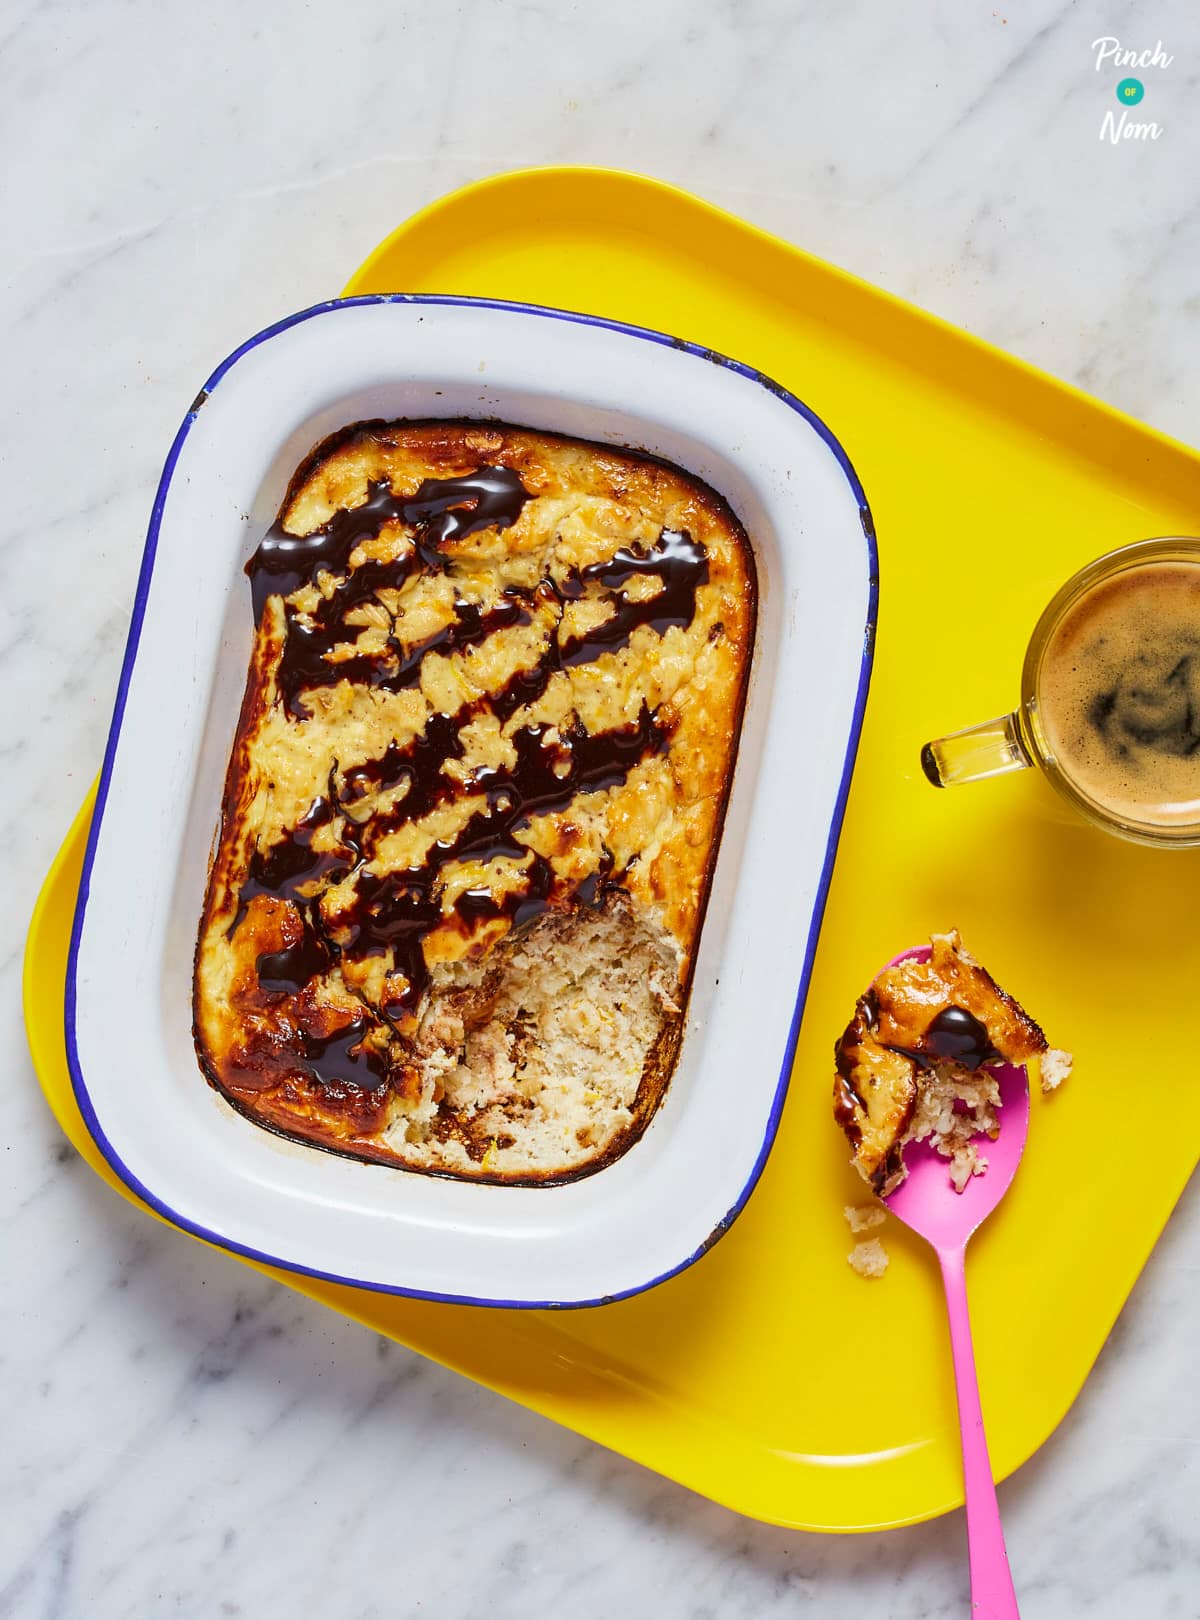 Chocolate Orange Baked Oats - Pinch of Nom Slimming Recipes